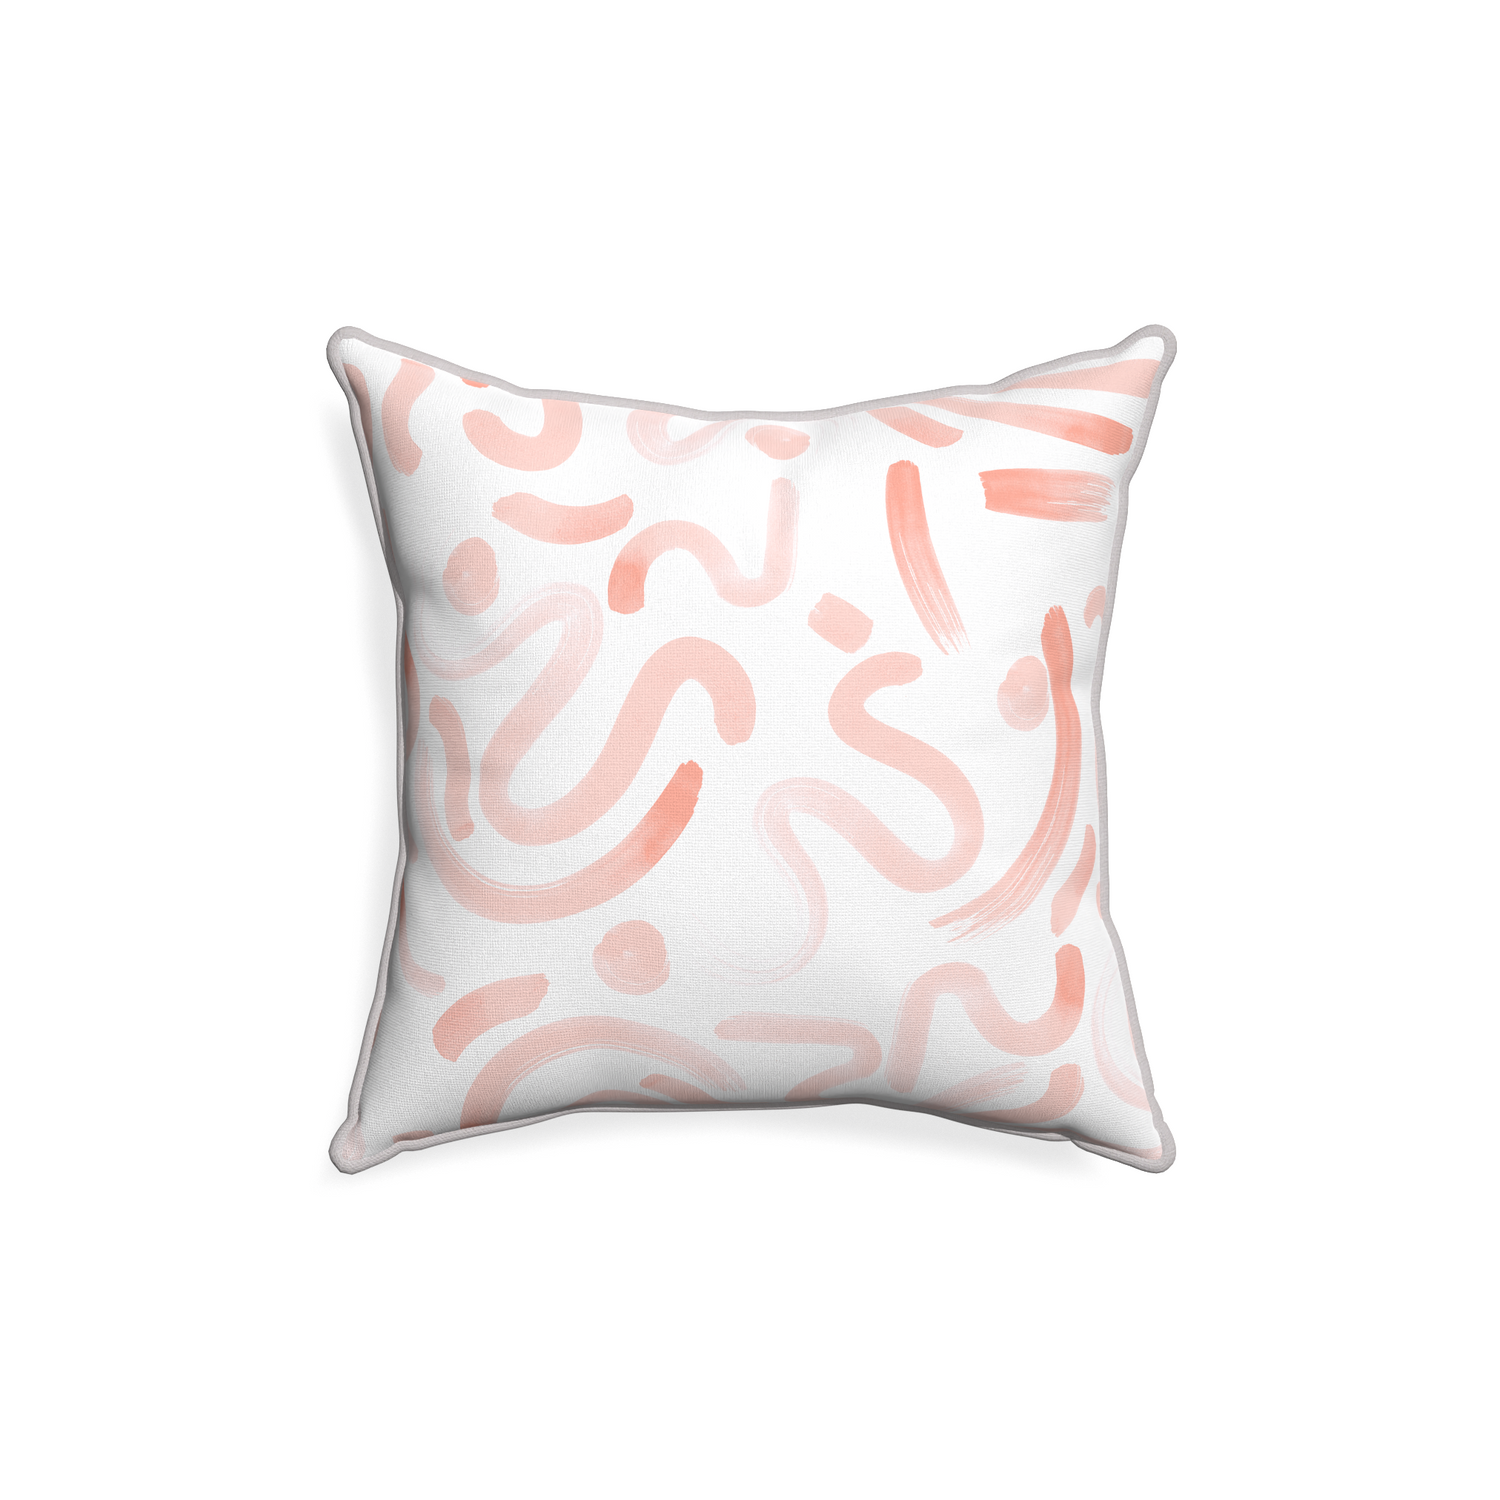 18-square hockney pink custom pink graphicpillow with pebble piping on white background